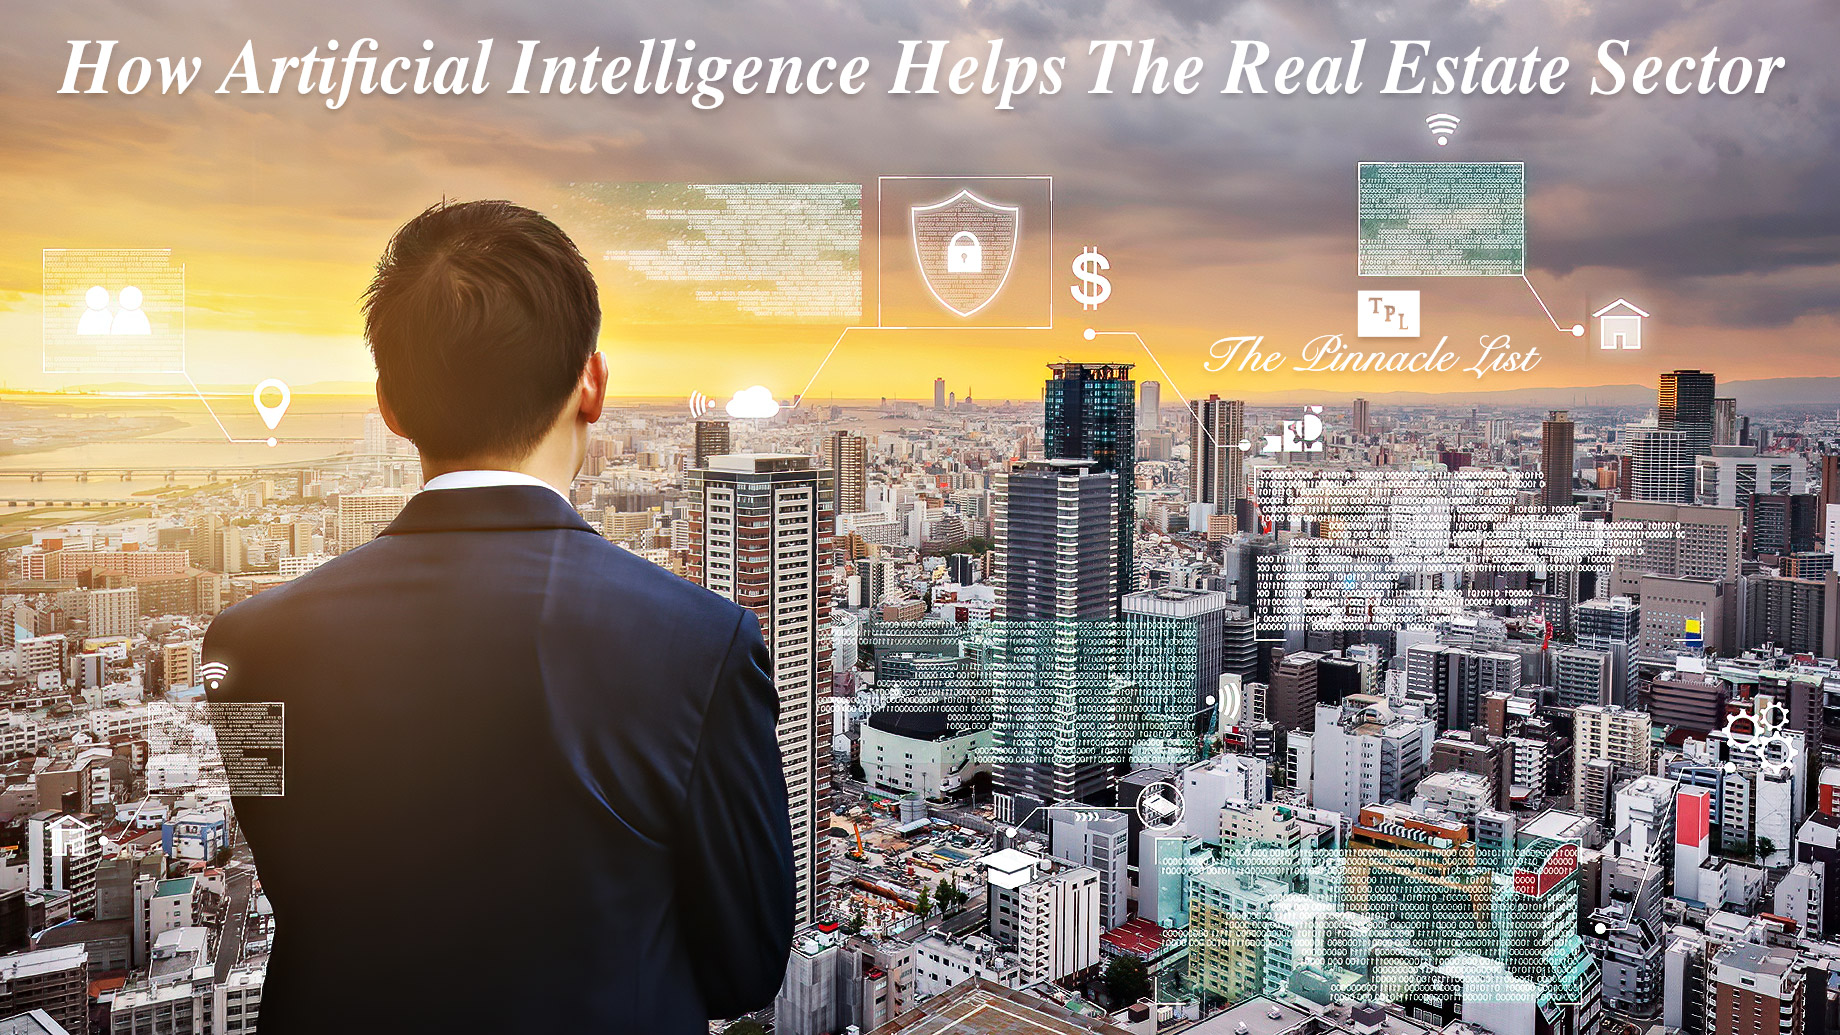 How Artificial Intelligence Helps The Real Estate Sector